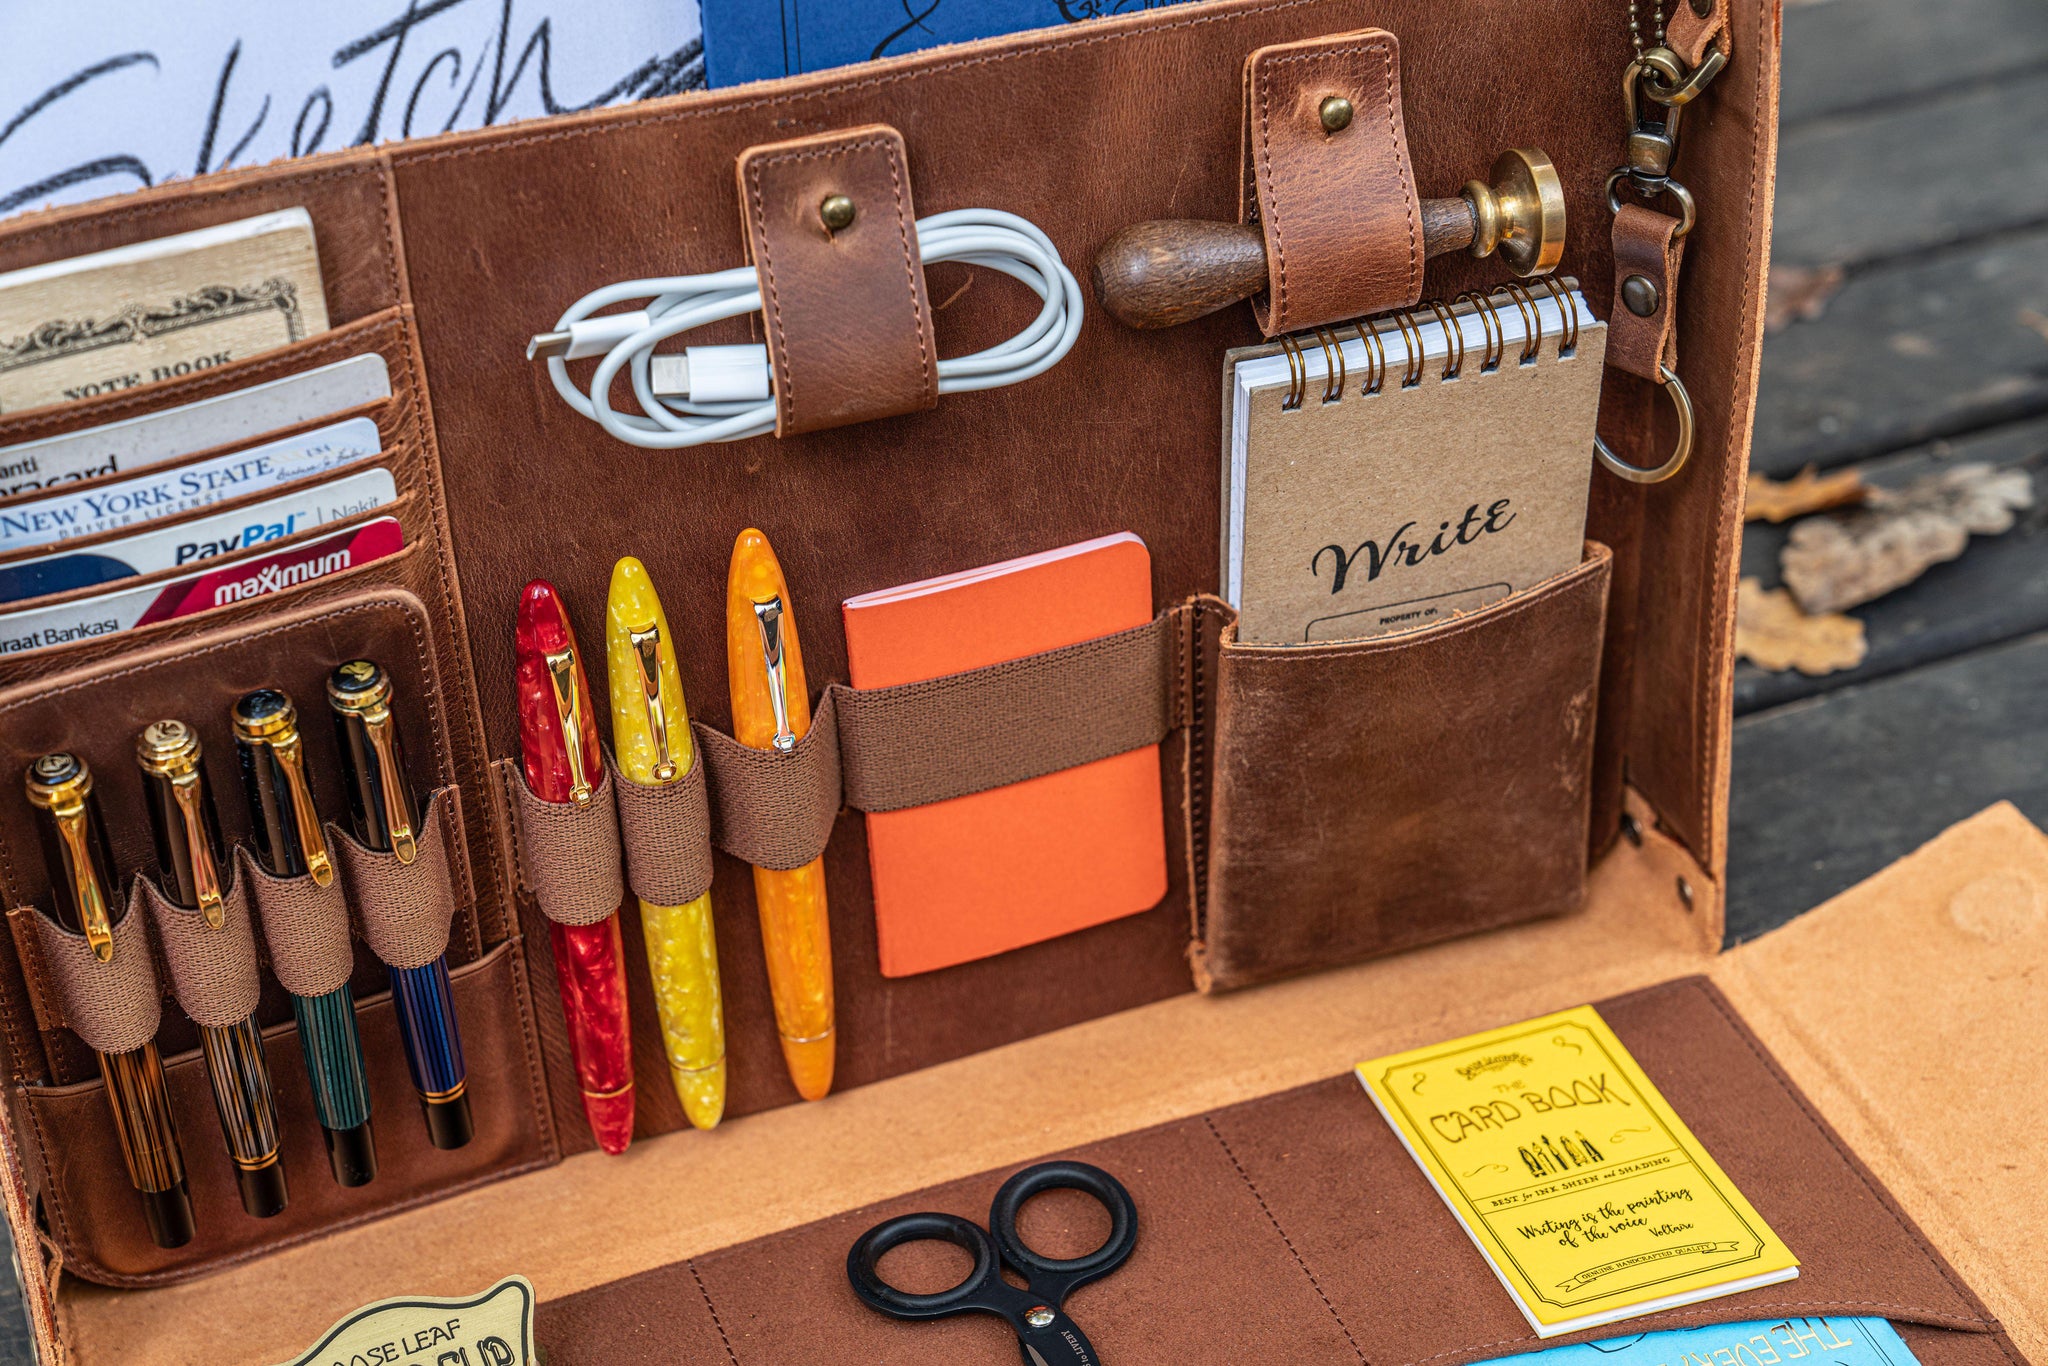 Galen Leather Writer's Bank Bag - Pen Puch Crazy Horse Tan